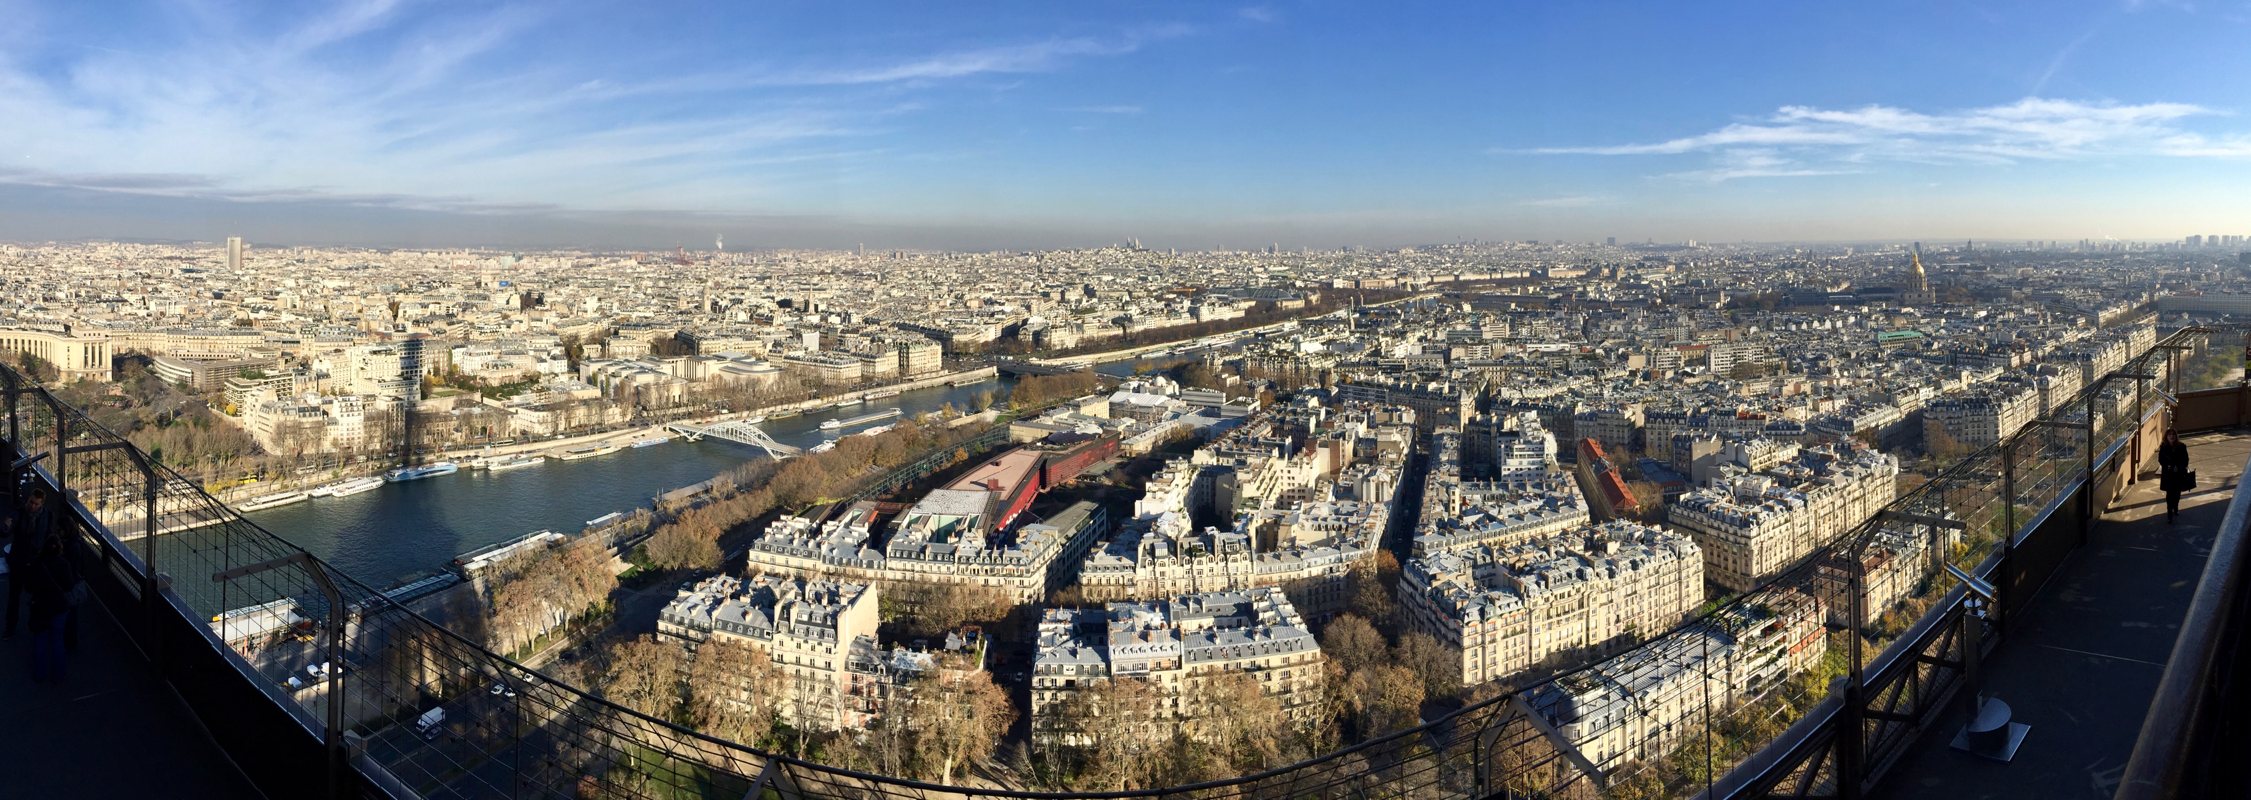 View of Paris from atop the Eiffel Tower